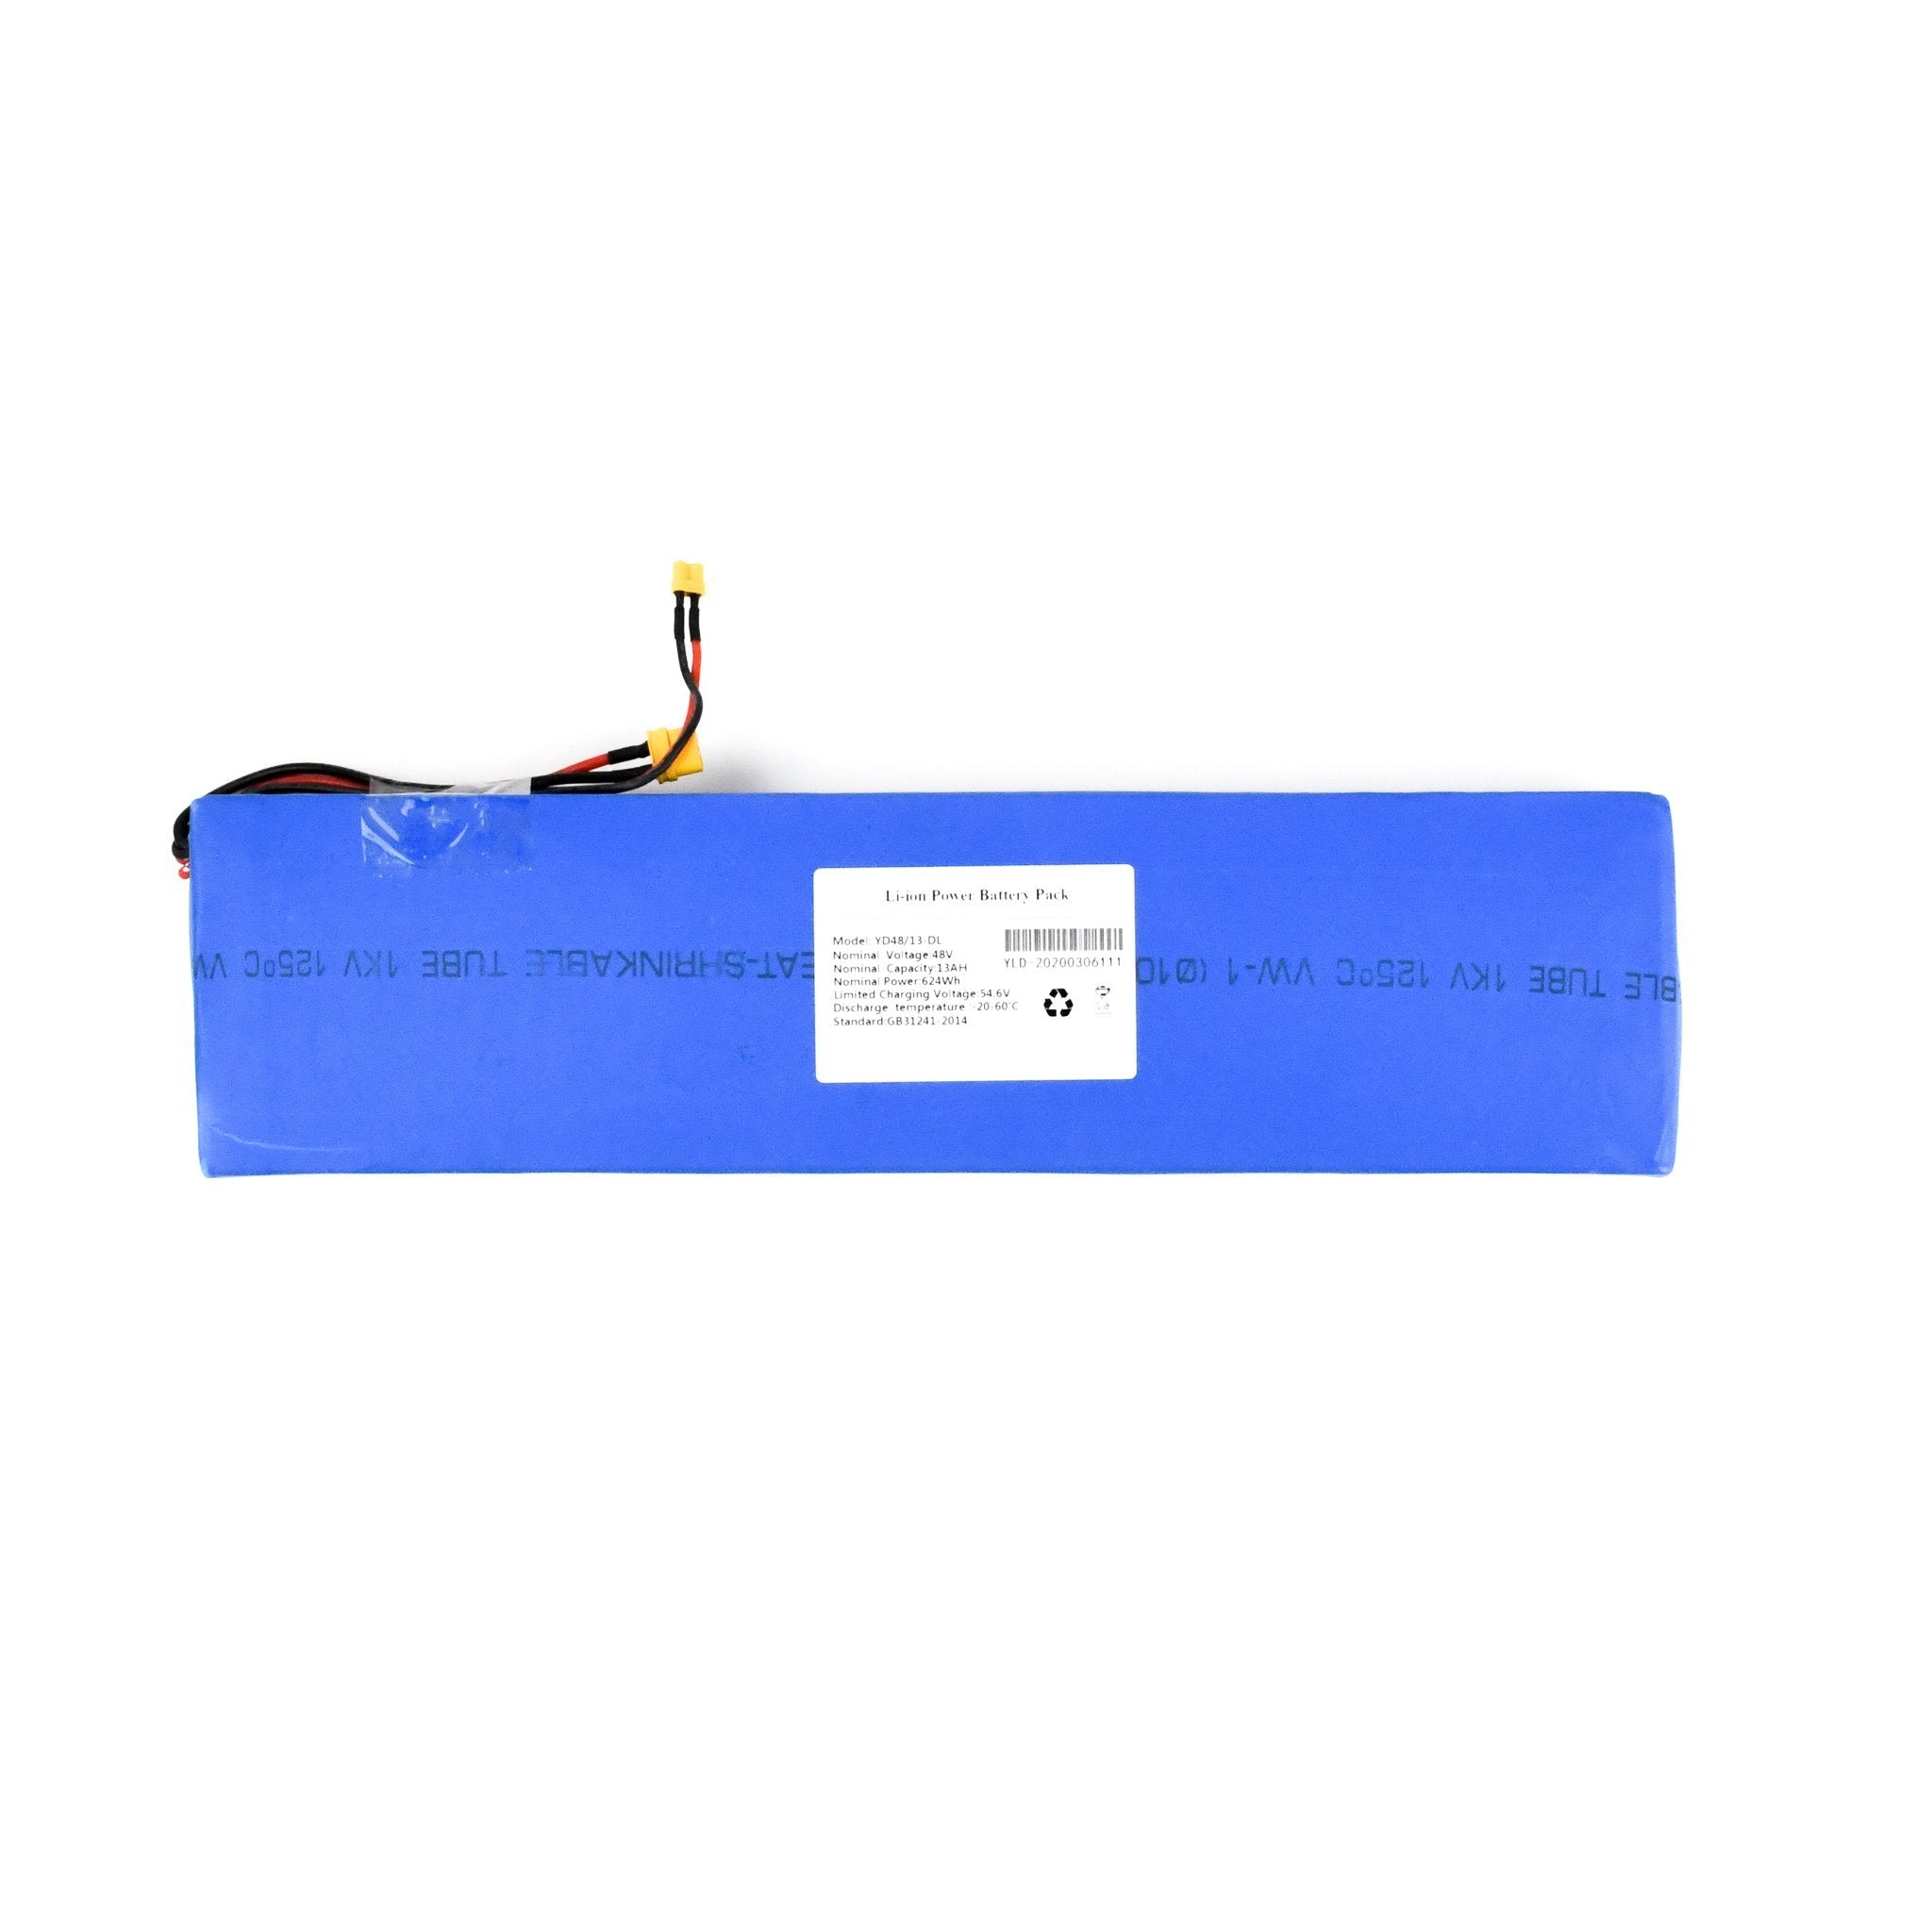 Spare battery for Apollo electric scooters